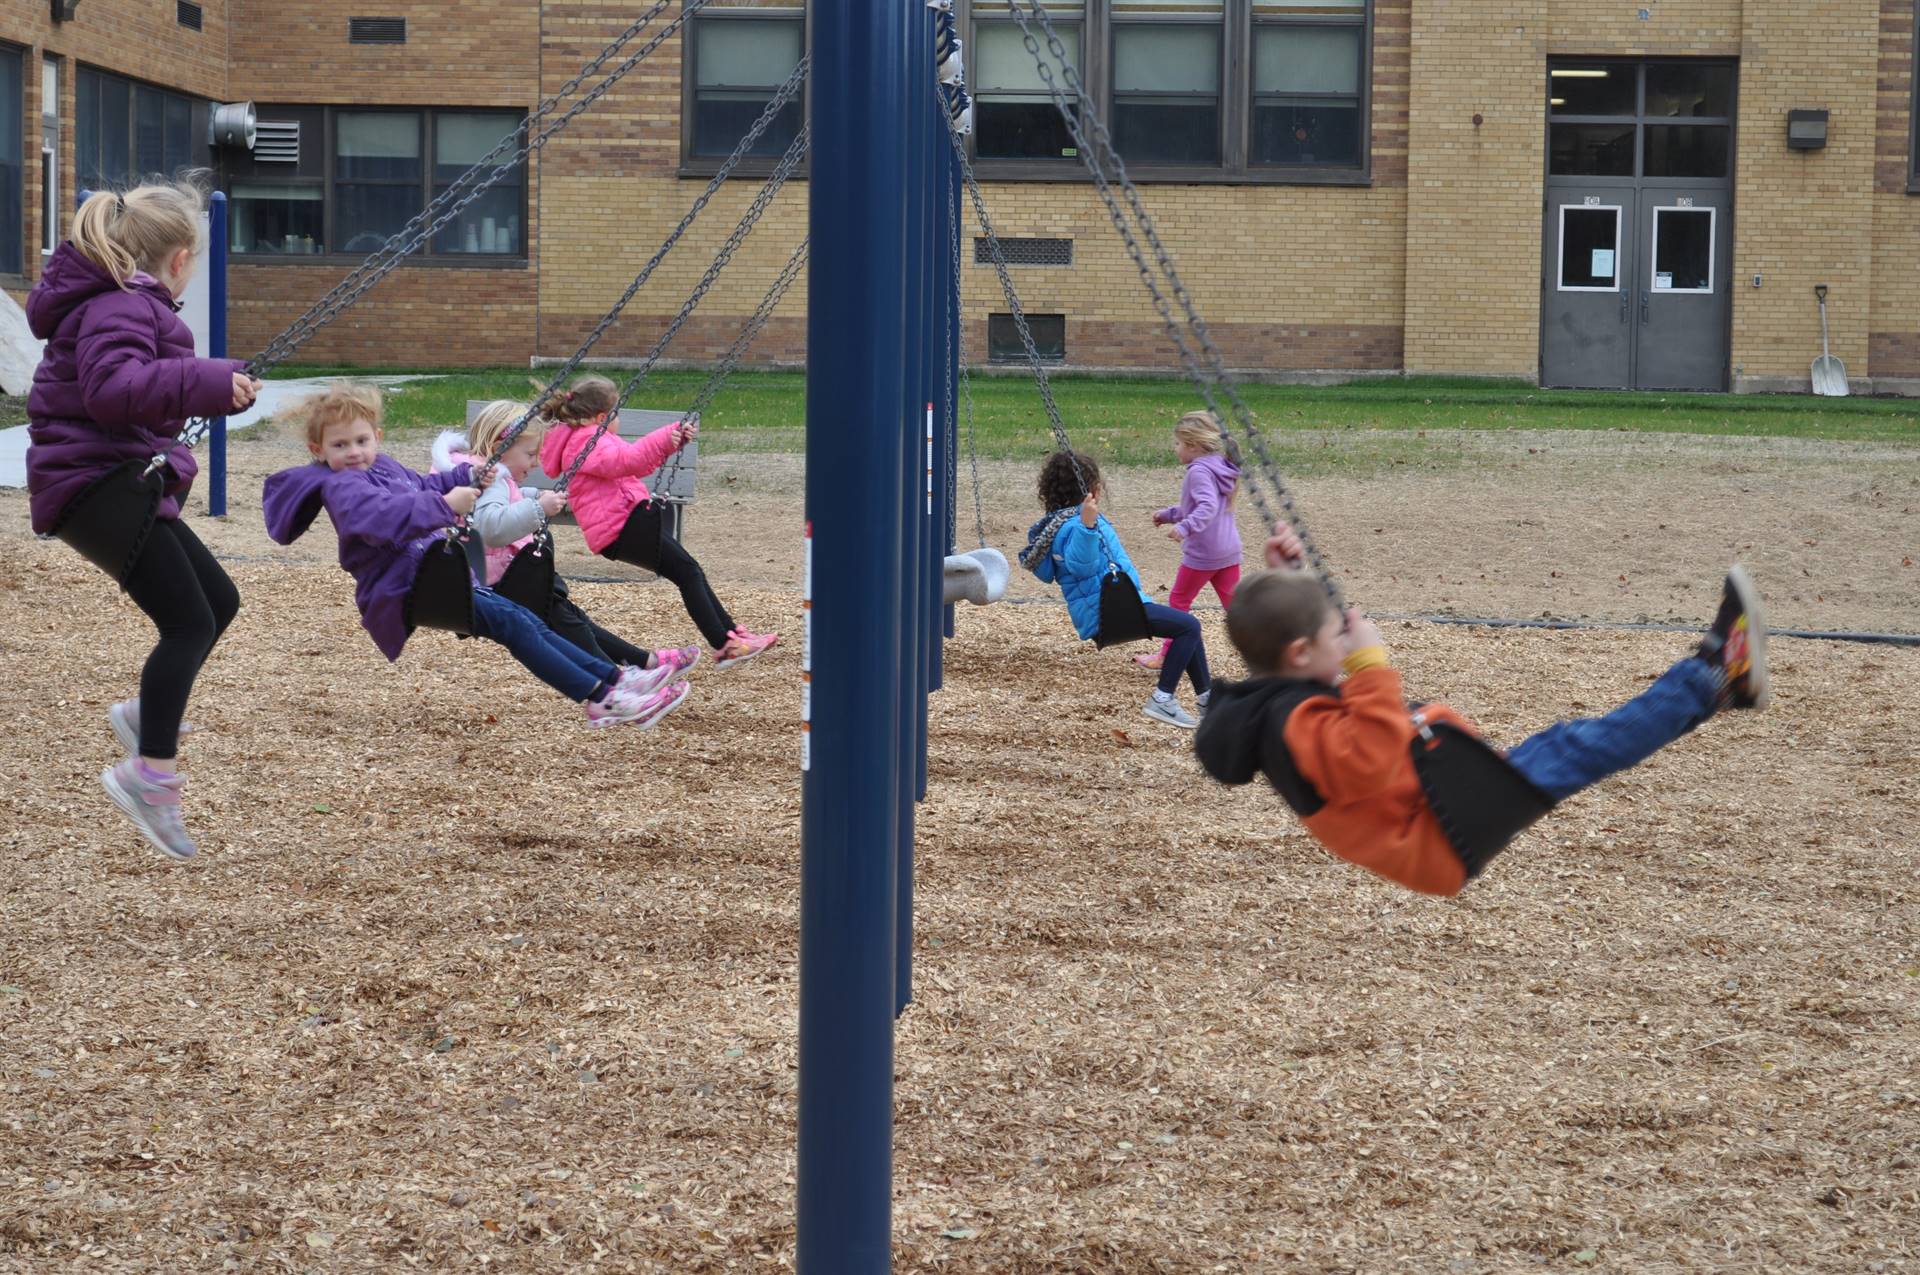 Students try swinging on the playground.